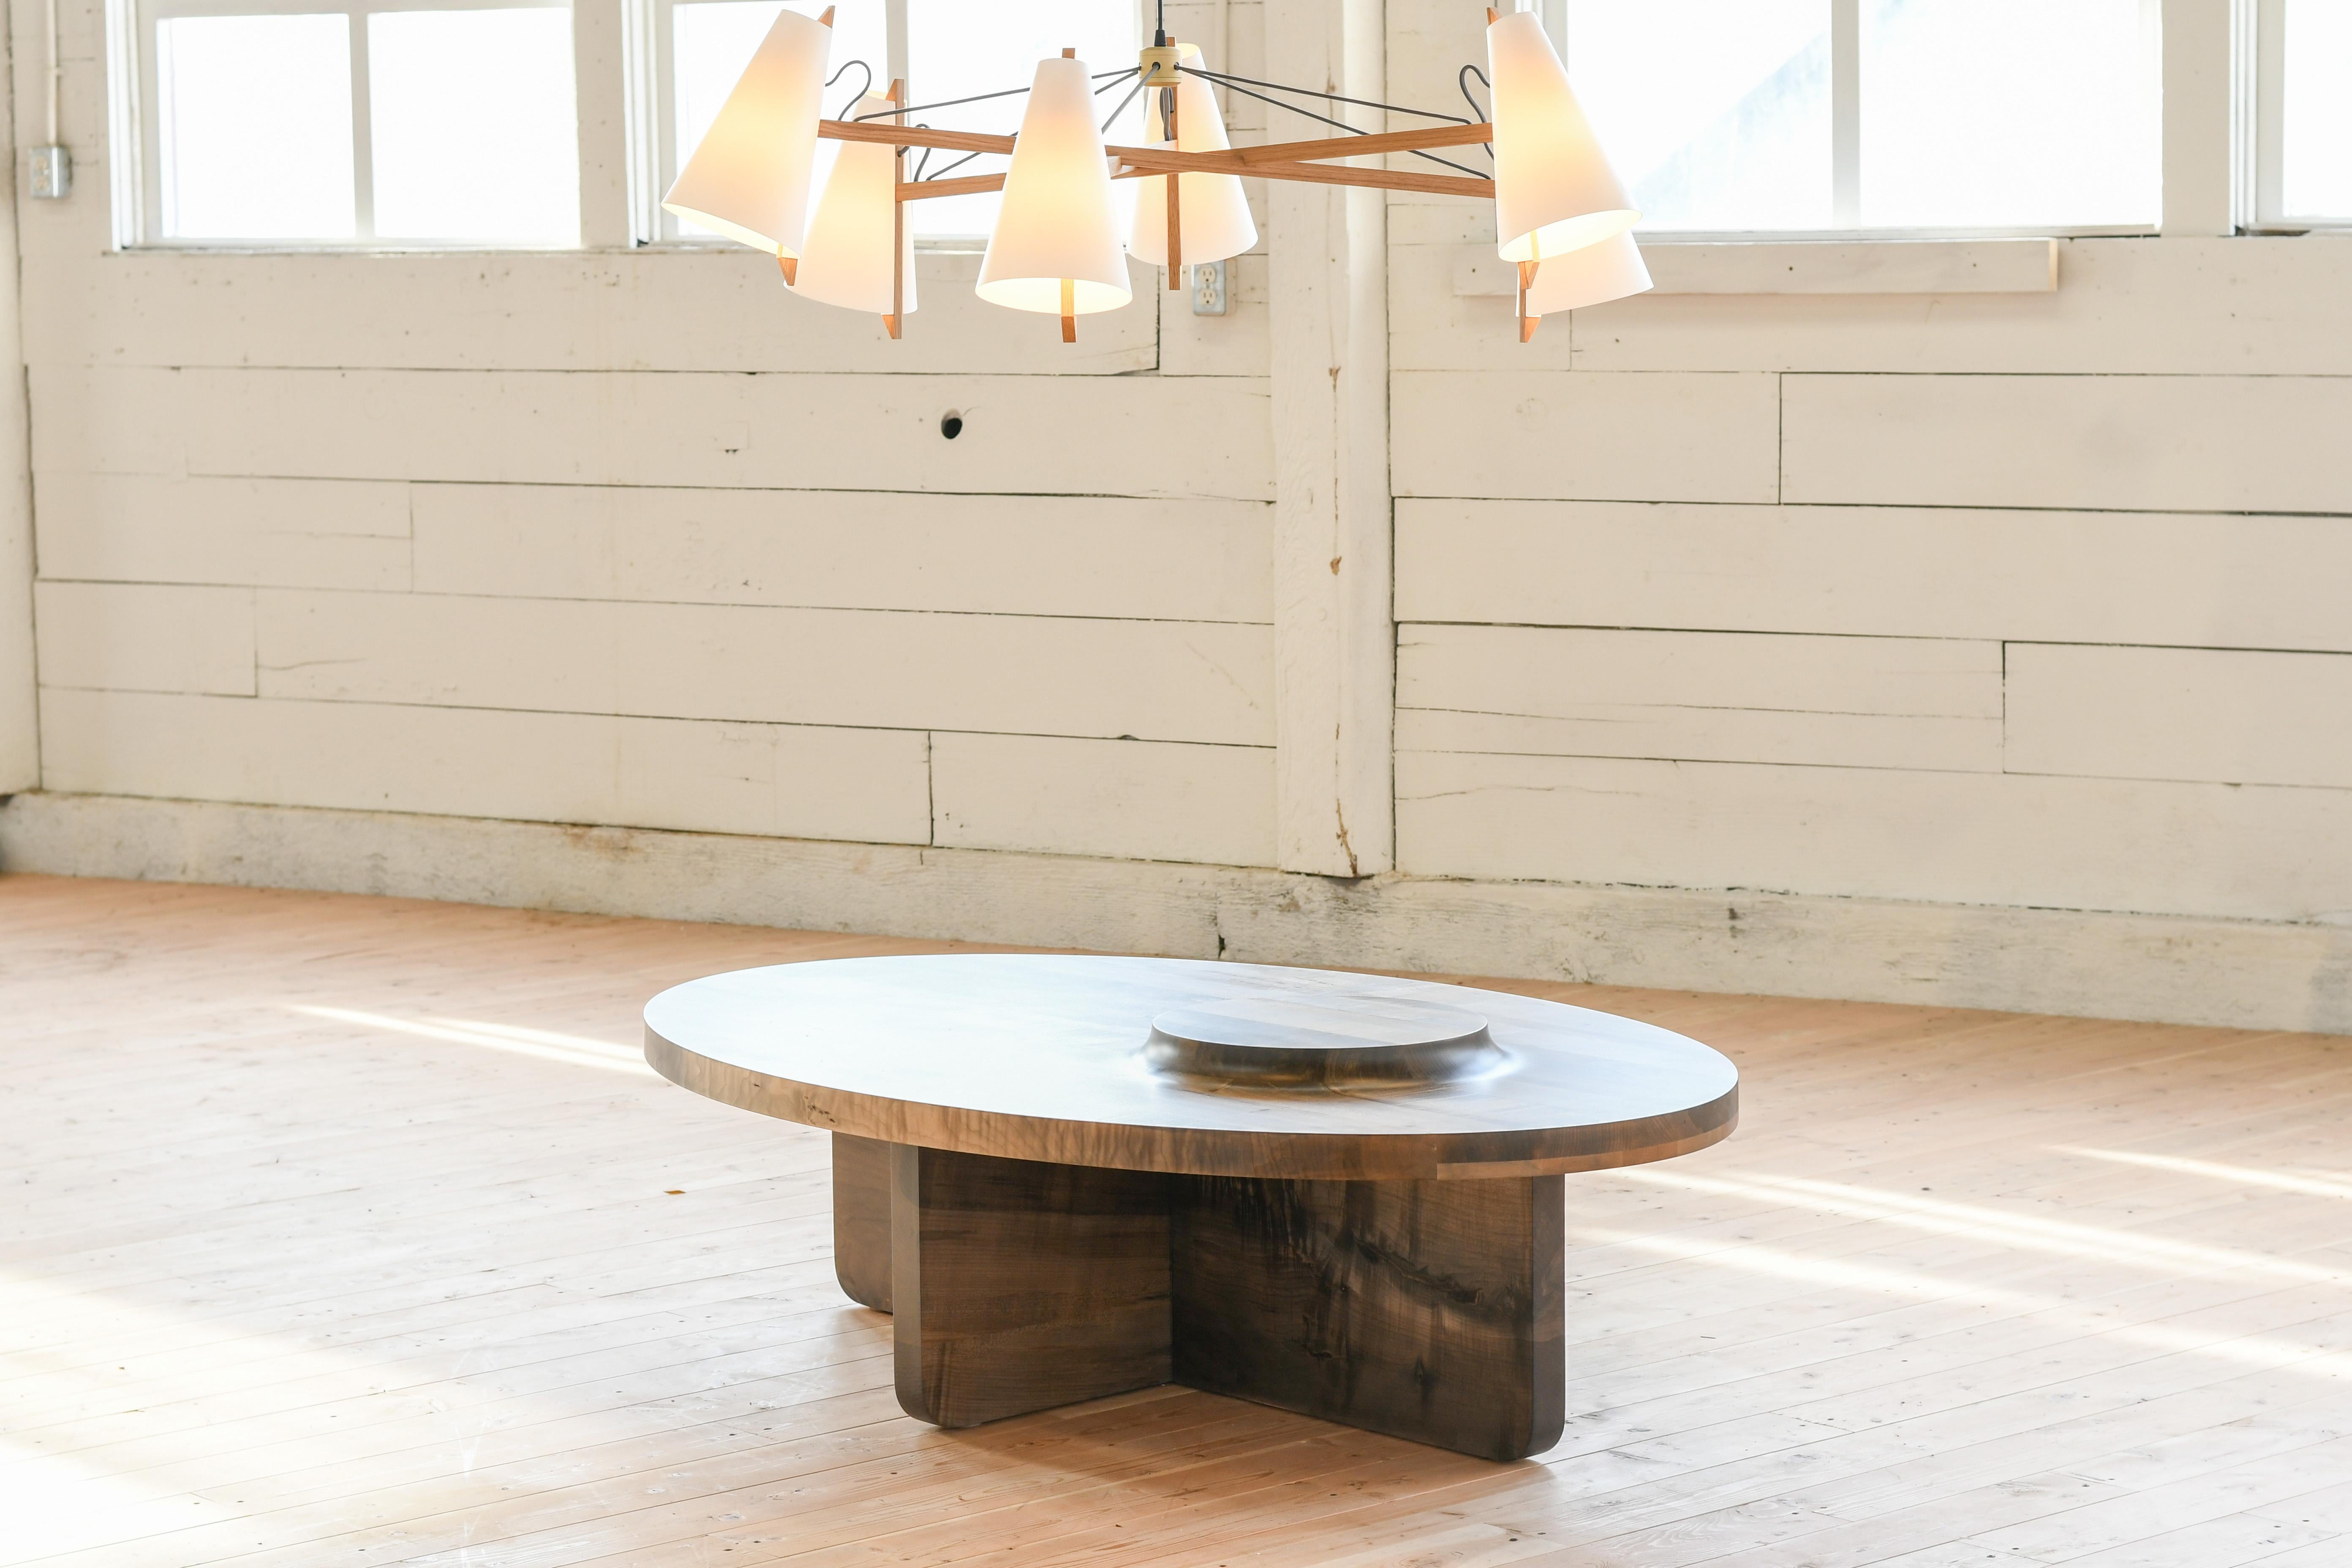 Hand carved custom wooden coffee table with an elevated Mesa portion. Shown in our oval version at 40